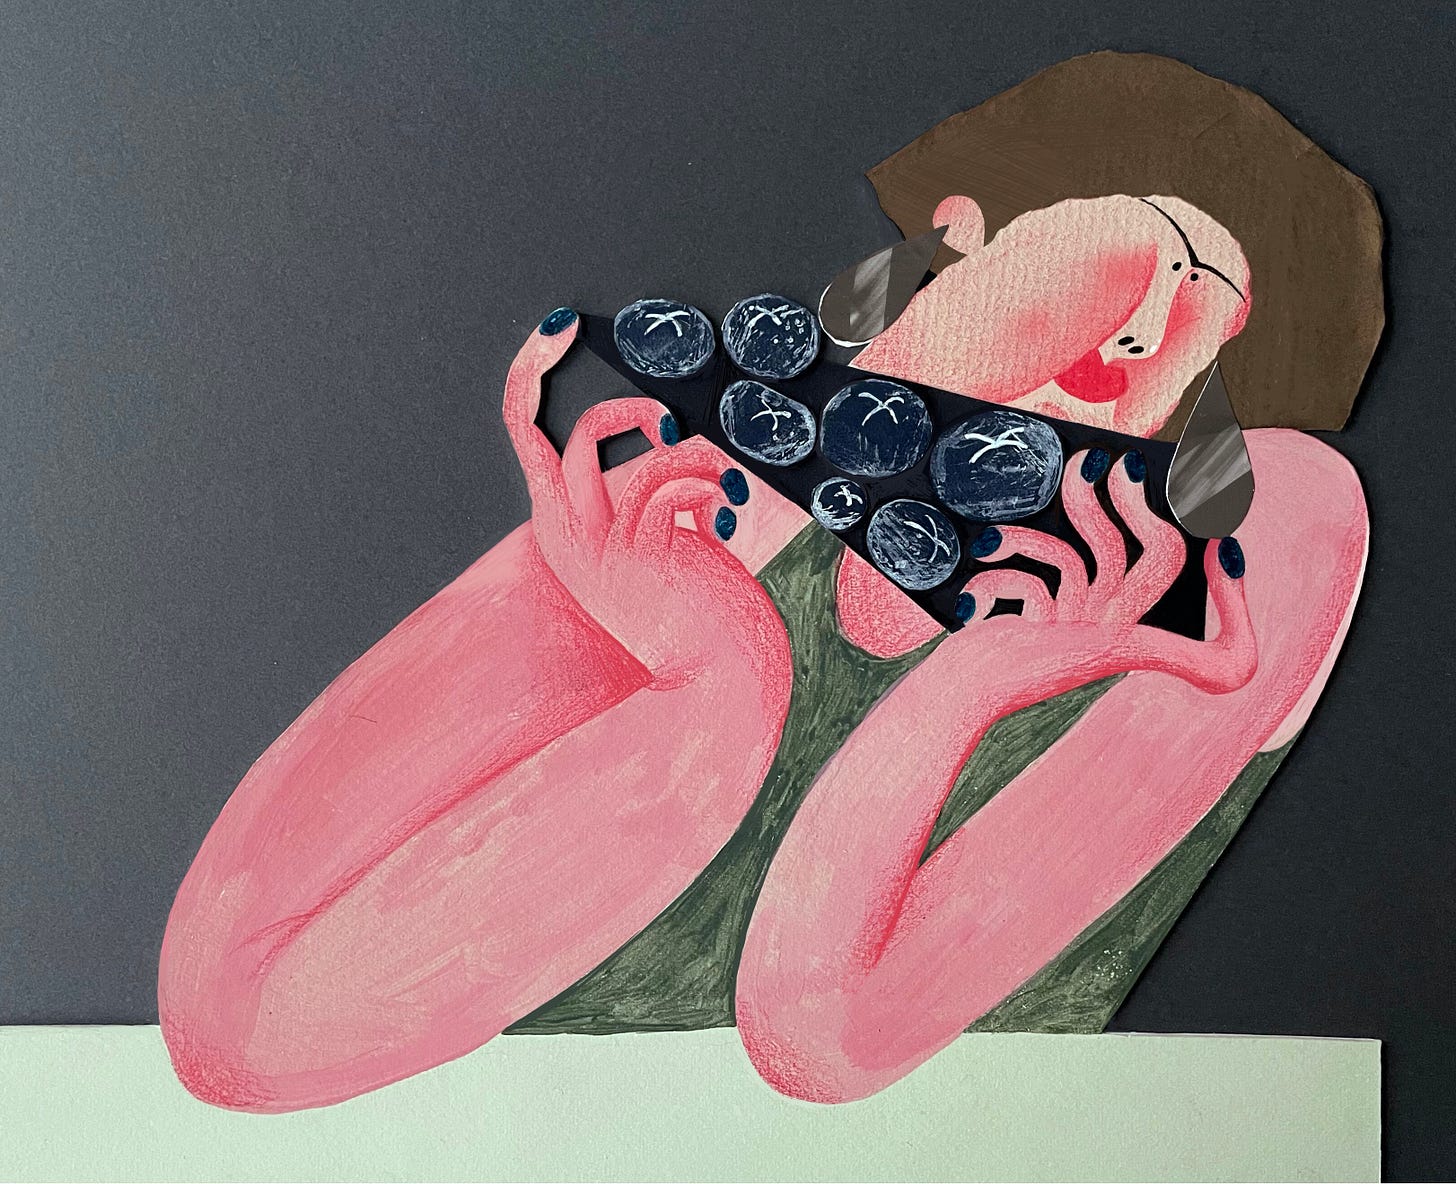 A painted paper cutout of a figure, with large teardrop earrings, holding a slice of pie covered in blueberries.